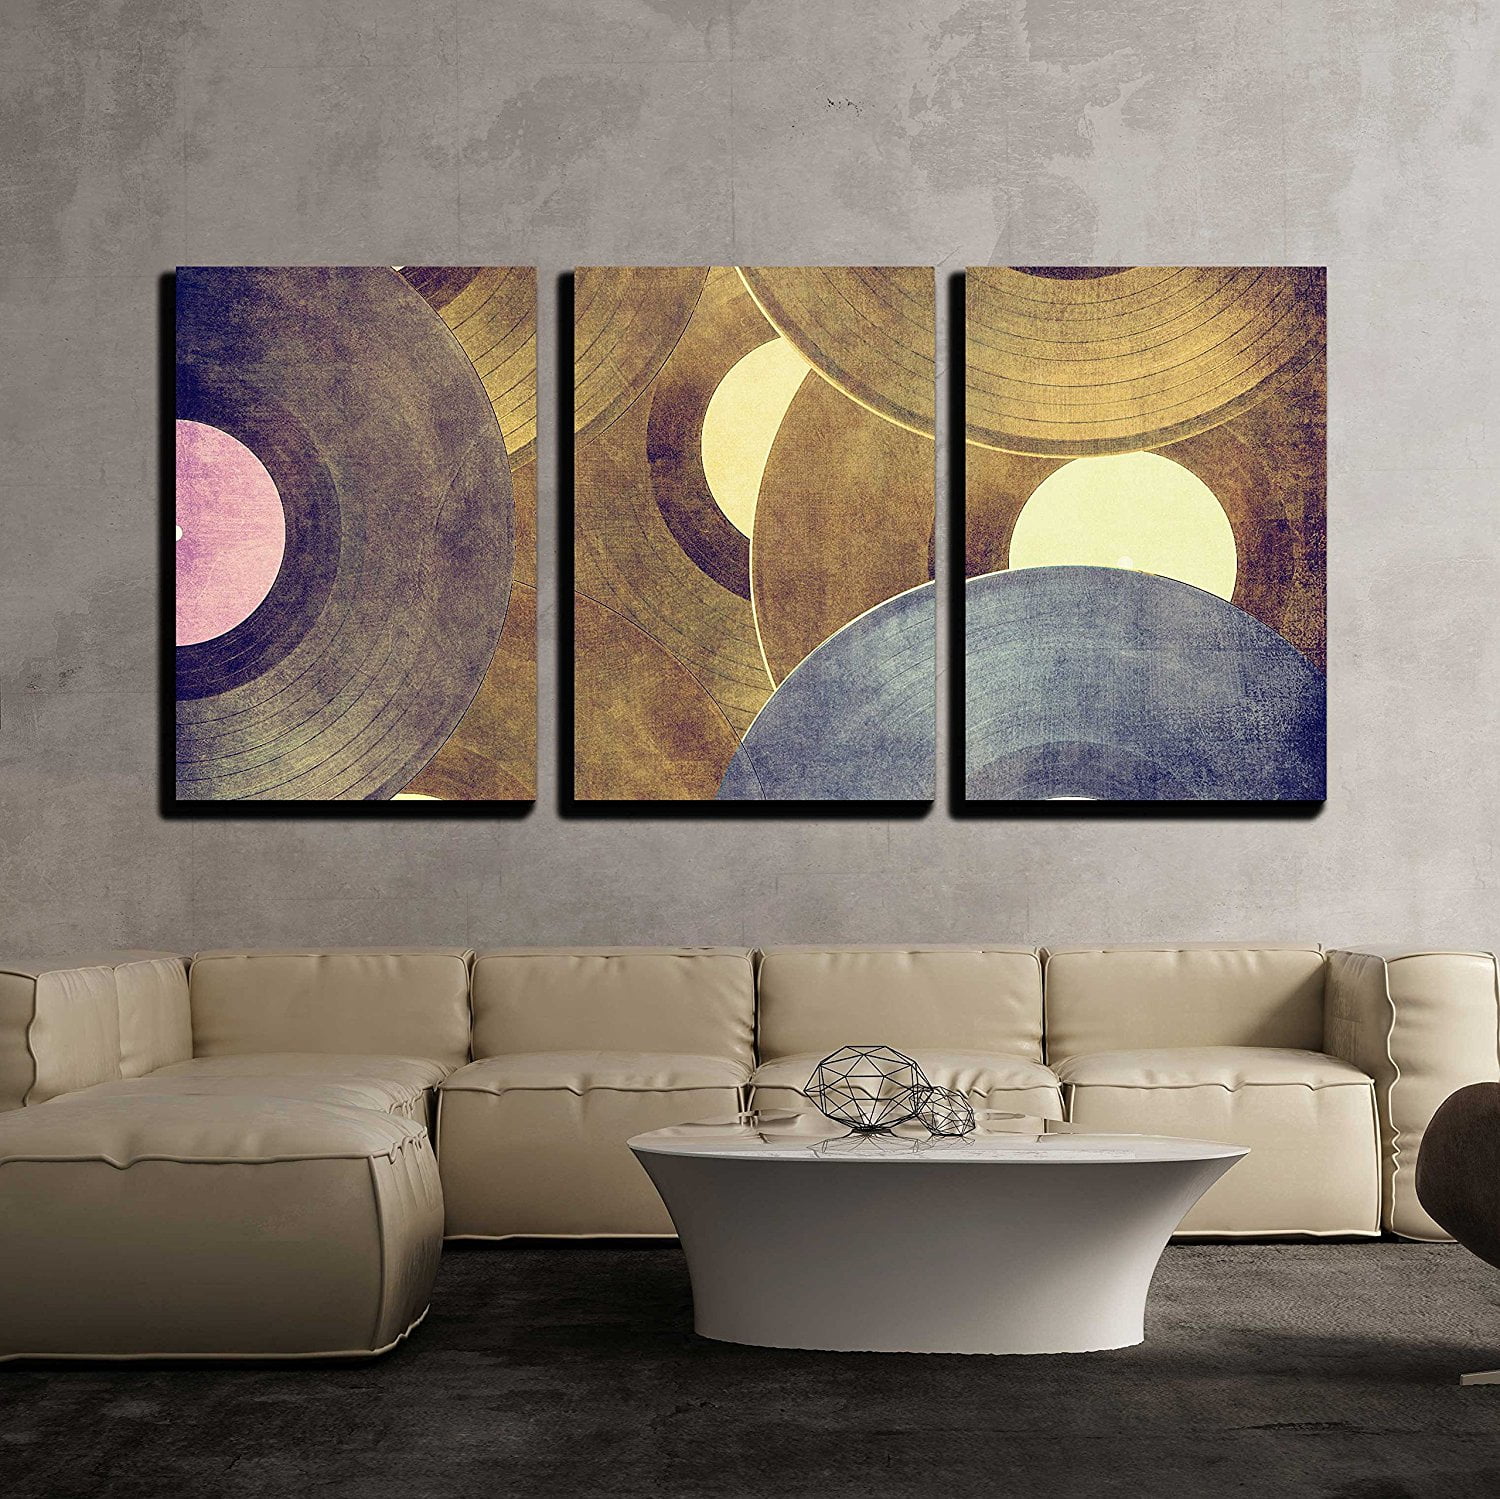 Wall26 3 Piece Canvas Wall Art Vinyl Records Music Modern Home Stretched and Framed Ready to Hang - 24"x36"x3 Panels Walmart.com